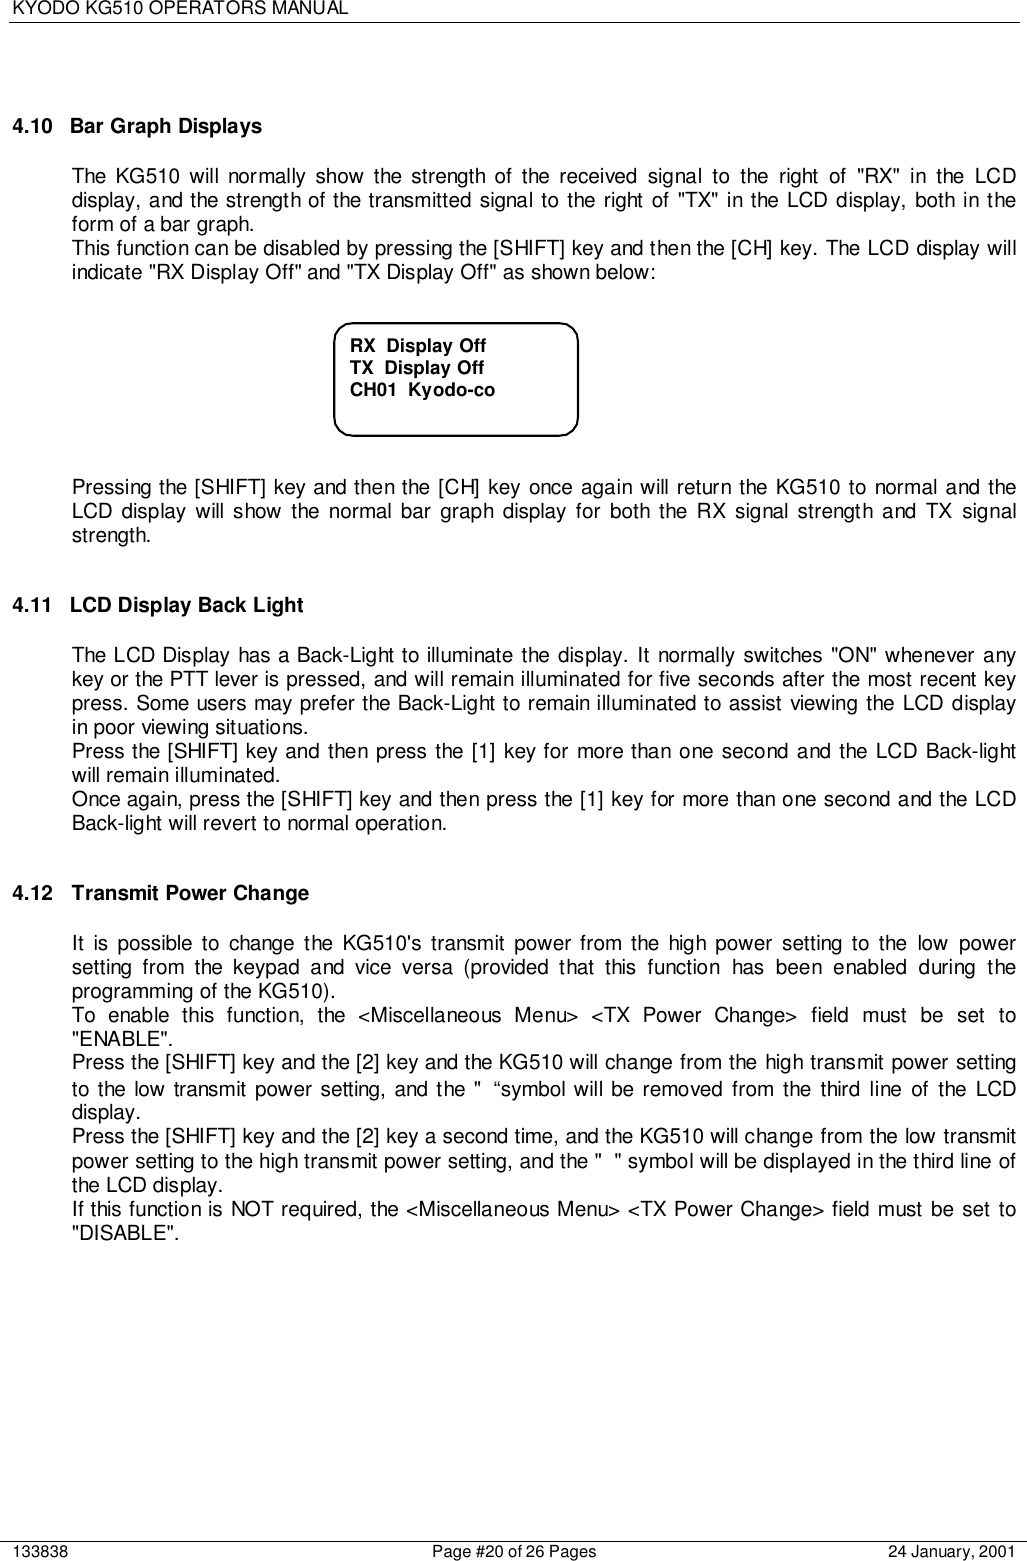 KYODO KG510 OPERATORS MANUAL133838 Page #20 of 26 Pages 24 January, 20014.10  Bar Graph DisplaysThe KG510 will normally show the strength of the received signal to the right of &quot;RX&quot; in the LCDdisplay, and the strength of the transmitted signal to the right of &quot;TX&quot; in the LCD display, both in theform of a bar graph.This function can be disabled by pressing the [SHIFT] key and then the [CH] key. The LCD display willindicate &quot;RX Display Off&quot; and &quot;TX Display Off&quot; as shown below:Pressing the [SHIFT] key and then the [CH] key once again will return the KG510 to normal and theLCD display will show the normal bar graph display for both the RX signal strength and TX signalstrength.4.11  LCD Display Back LightThe LCD Display has a Back-Light to illuminate the display. It normally switches &quot;ON&quot; whenever anykey or the PTT lever is pressed, and will remain illuminated for five seconds after the most recent keypress. Some users may prefer the Back-Light to remain illuminated to assist viewing the LCD displayin poor viewing situations.Press the [SHIFT] key and then press the [1] key for more than one second and the LCD Back-lightwill remain illuminated.Once again, press the [SHIFT] key and then press the [1] key for more than one second and the LCDBack-light will revert to normal operation.4.12 Transmit Power ChangeIt is possible to change the KG510&apos;s transmit power from the high power setting to the low powersetting from the keypad and vice versa (provided that this function has been enabled during theprogramming of the KG510).To enable this function, the &lt;Miscellaneous Menu&gt; &lt;TX Power Change&gt; field must be set to&quot;ENABLE&quot;.Press the [SHIFT] key and the [2] key and the KG510 will change from the high transmit power settingto the low transmit power setting, and the &quot; “symbol will be removed from the third line of the LCDdisplay.Press the [SHIFT] key and the [2] key a second time, and the KG510 will change from the low transmitpower setting to the high transmit power setting, and the &quot; &quot; symbol will be displayed in the third line ofthe LCD display.If this function is NOT required, the &lt;Miscellaneous Menu&gt; &lt;TX Power Change&gt; field must be set to&quot;DISABLE&quot;.RX  Display OffTX  Display OffCH01  Kyodo-co